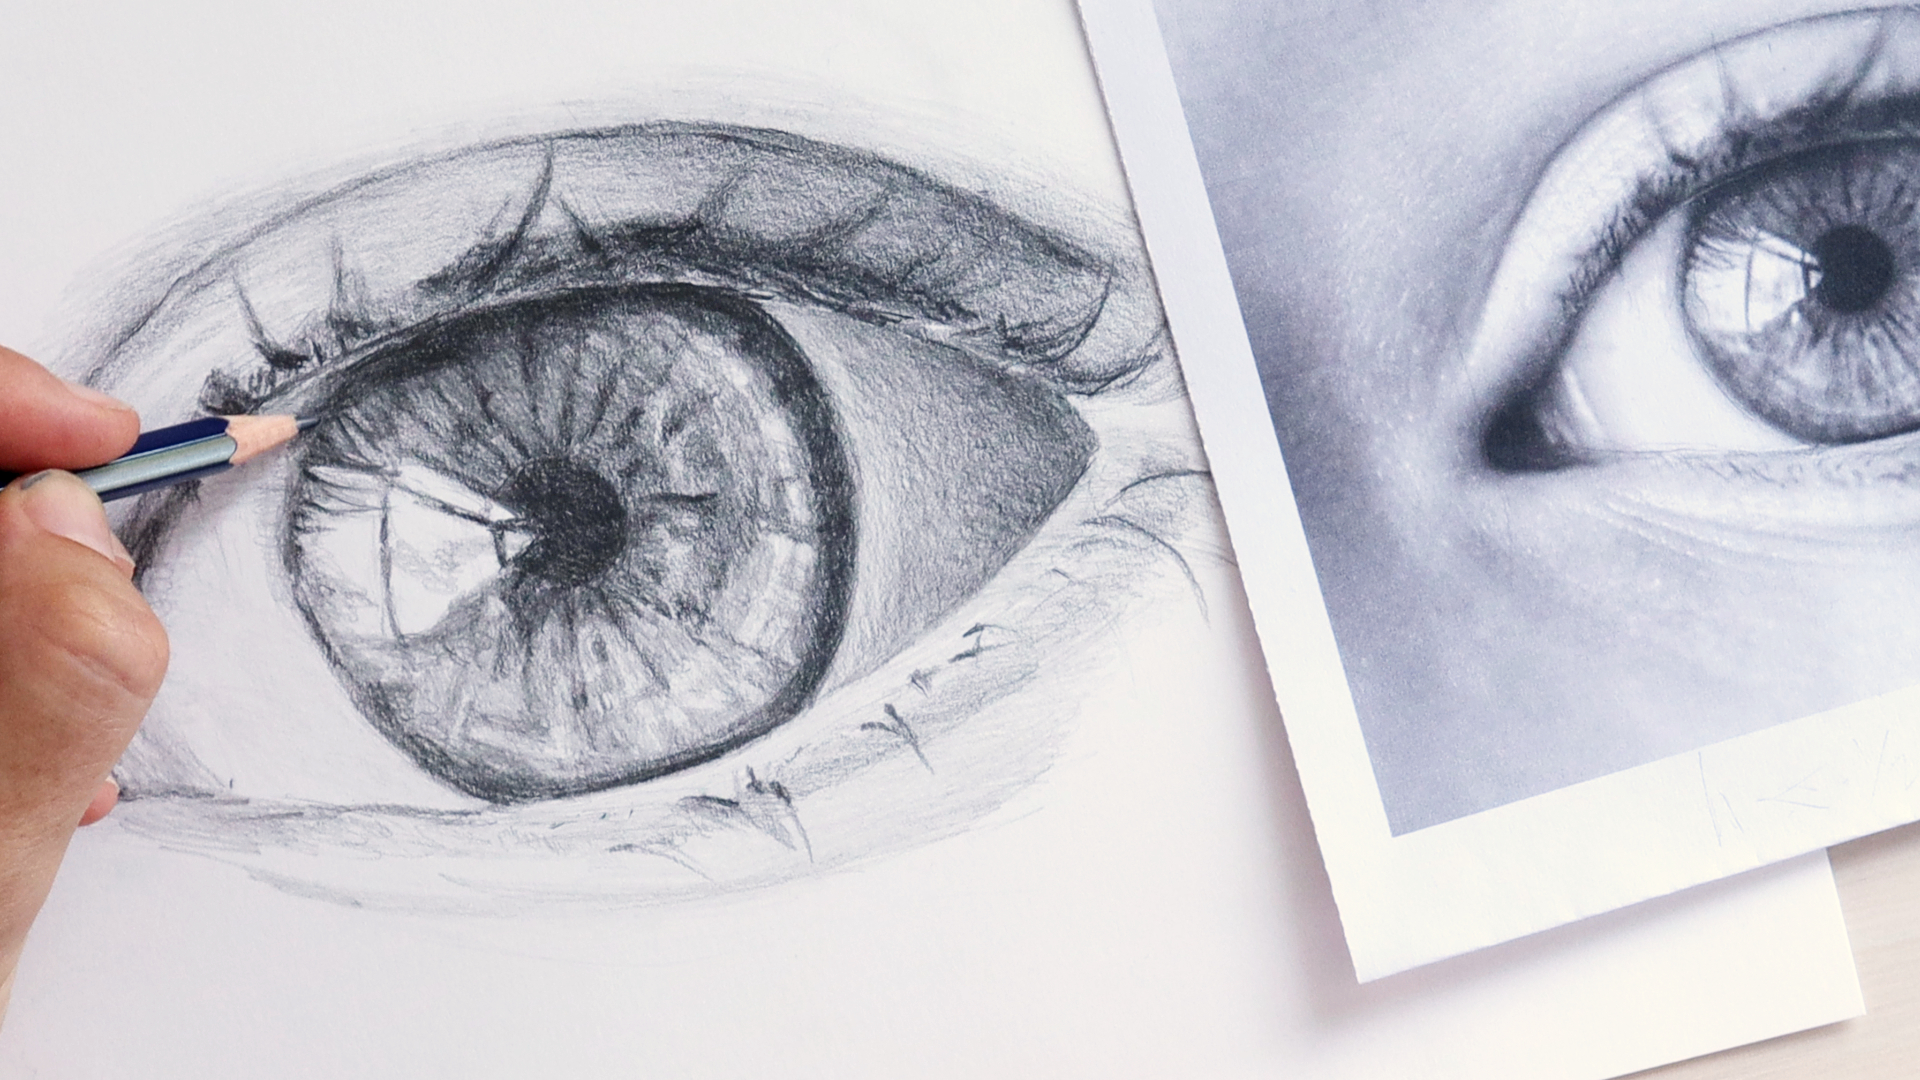 Image showing a hand sketching a realistic eye drawing from a photograph